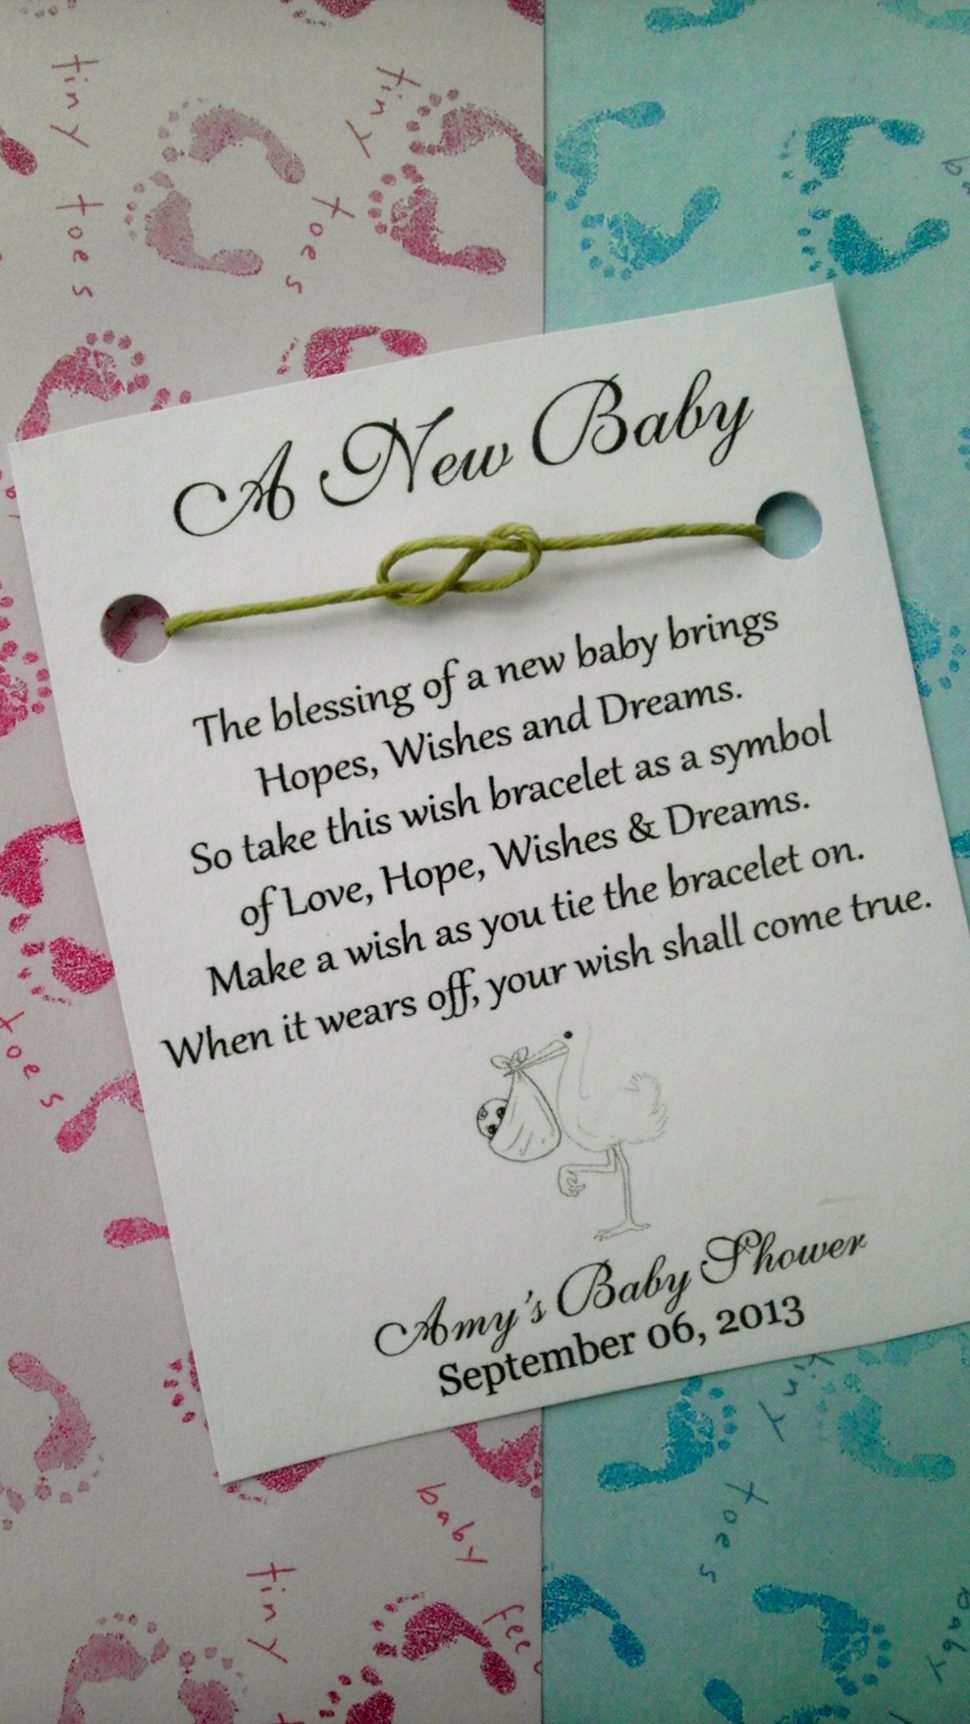 Medium Size of Baby Shower:stylish Baby Shower Wishes Picture Inspirations Baby Shower Wishes Baby Shower Poems Ideas Para Baby Shower Baby Shower Gift Ideas Princess Baby Shower Baby Shower Wish Bracelet Shower Favor Favors Personalized Middot That Wedding Boutique Middot Online Store Storenvy